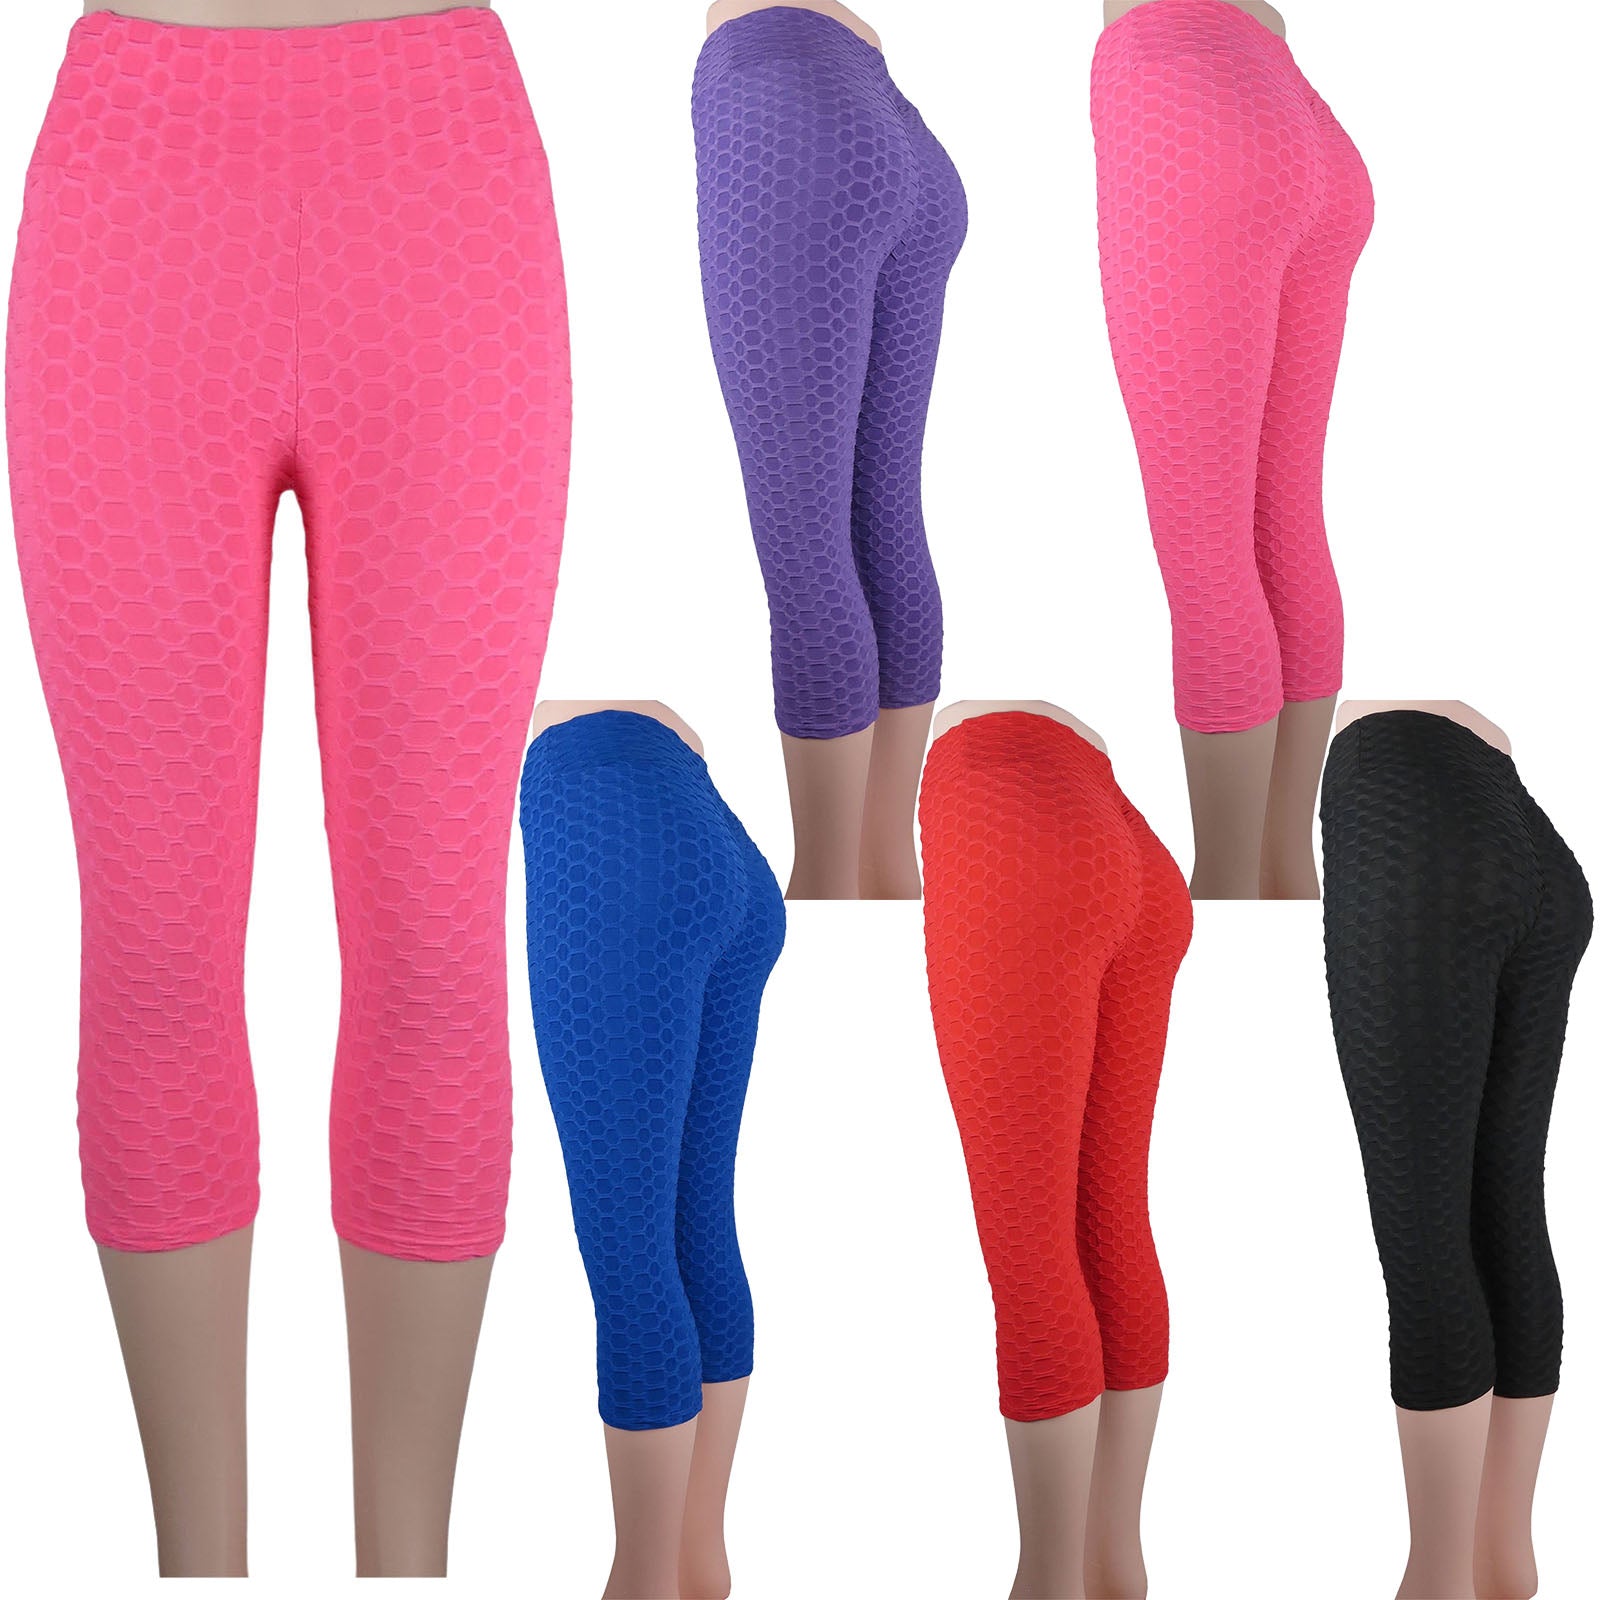 Wholesale hot sale tights wet look